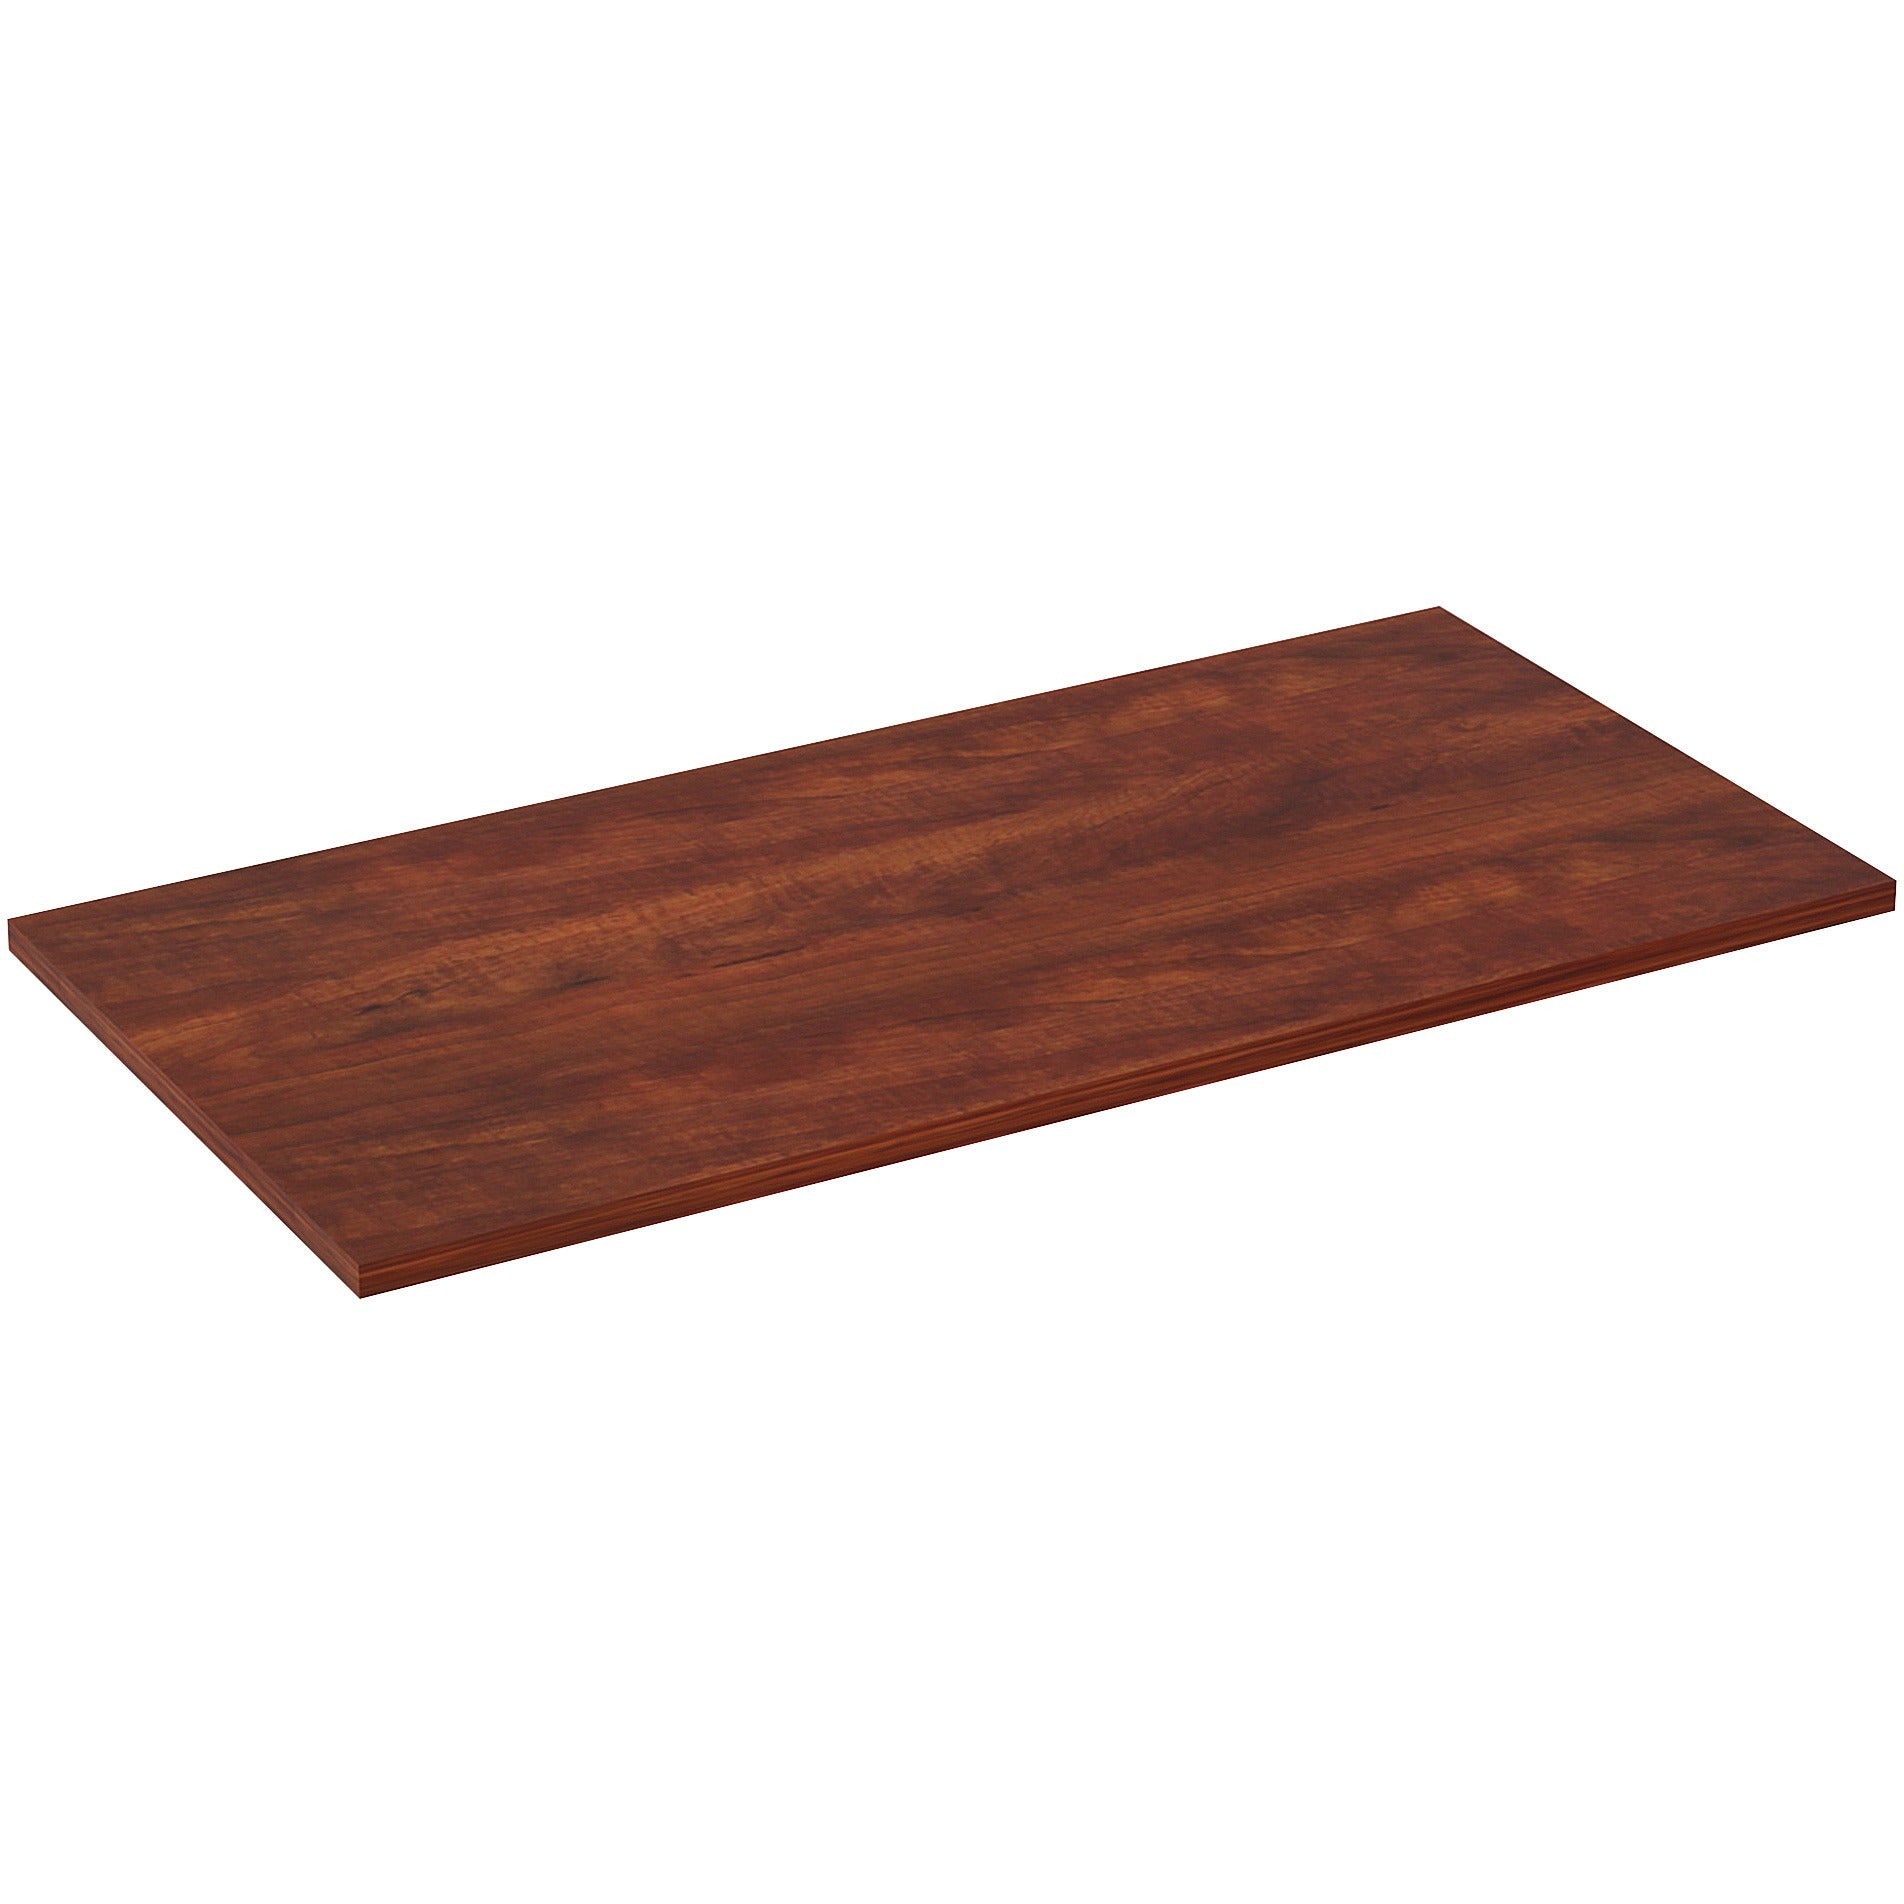 lorell-training-tabletop-for-table-topcherry-rectangle-laminated-top-48-table-top-length-x-24-table-top-width-x-1-table-top-thickness-assembly-required-1-each_llr59637 - 3